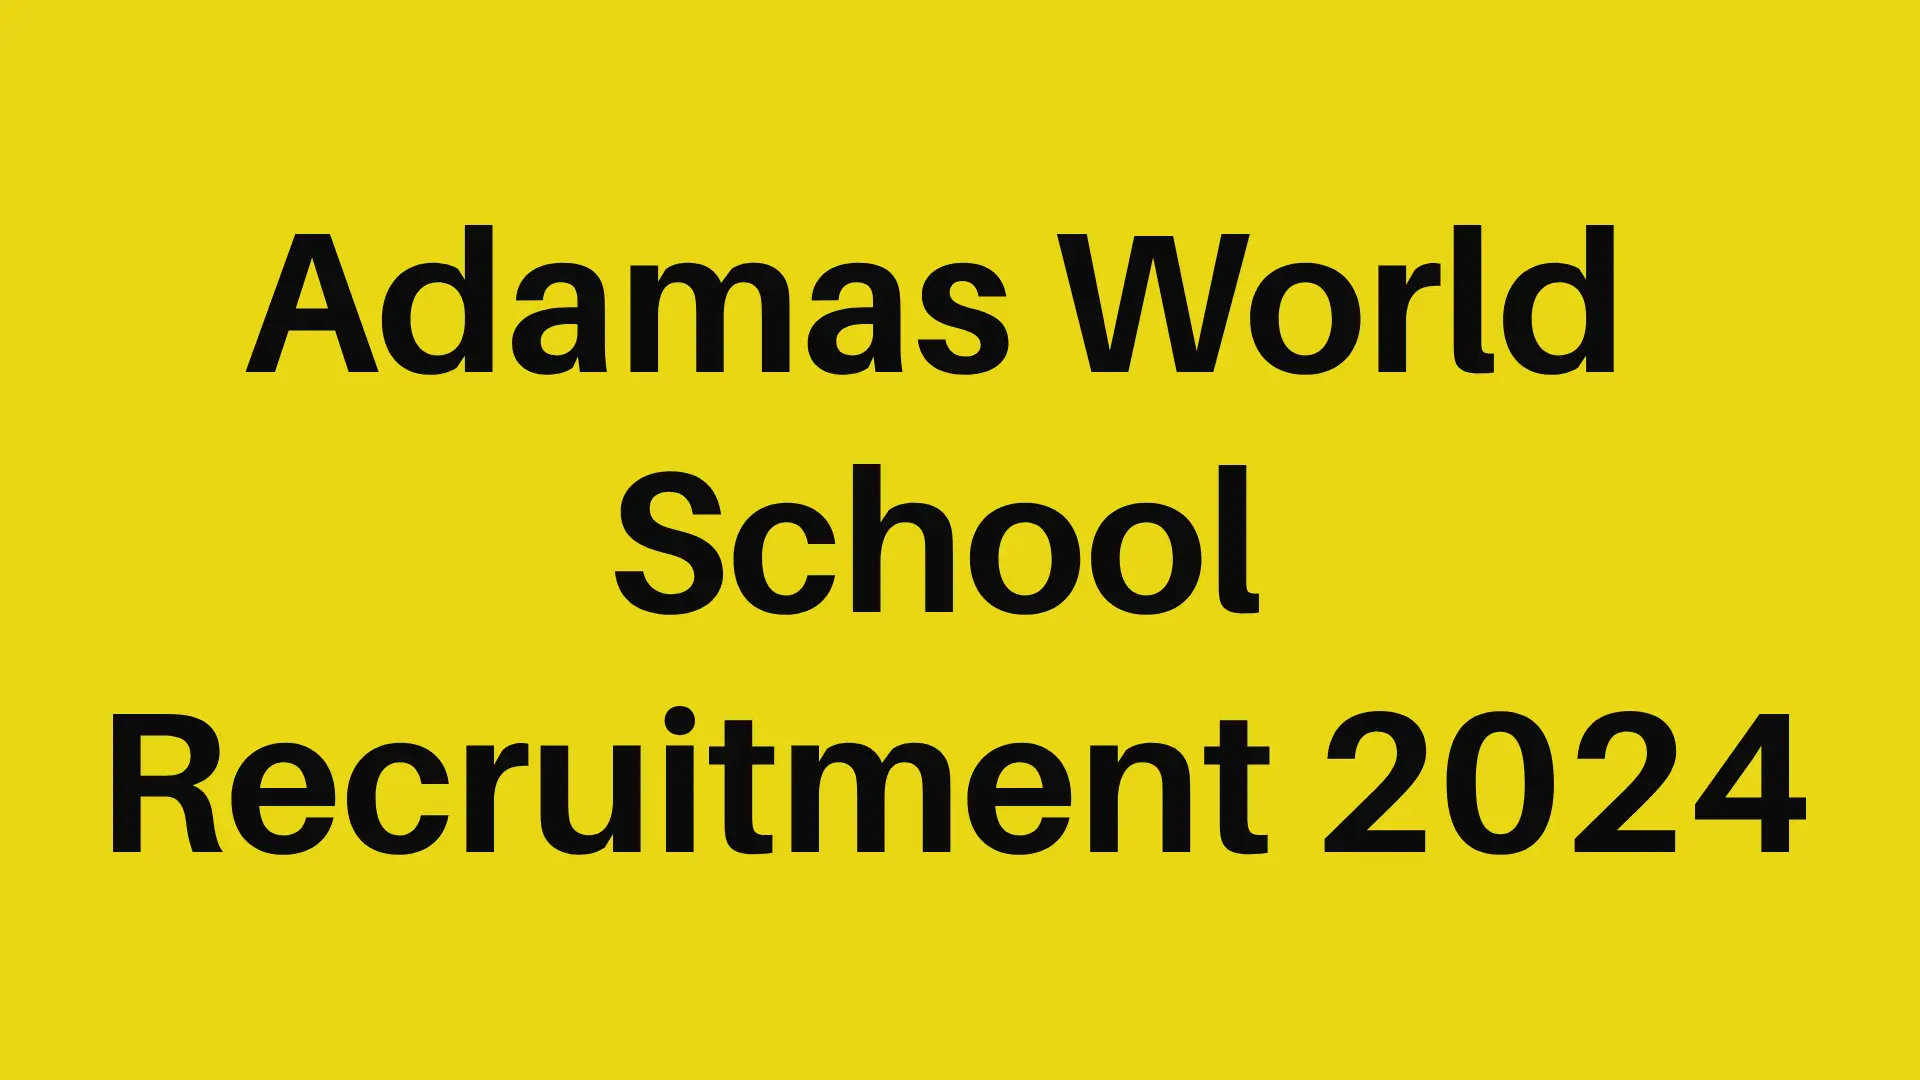 Adamas World School Recruitment 2024 : Check out for notification, apply Link, Eligibility, Age, Salary And How To Apply